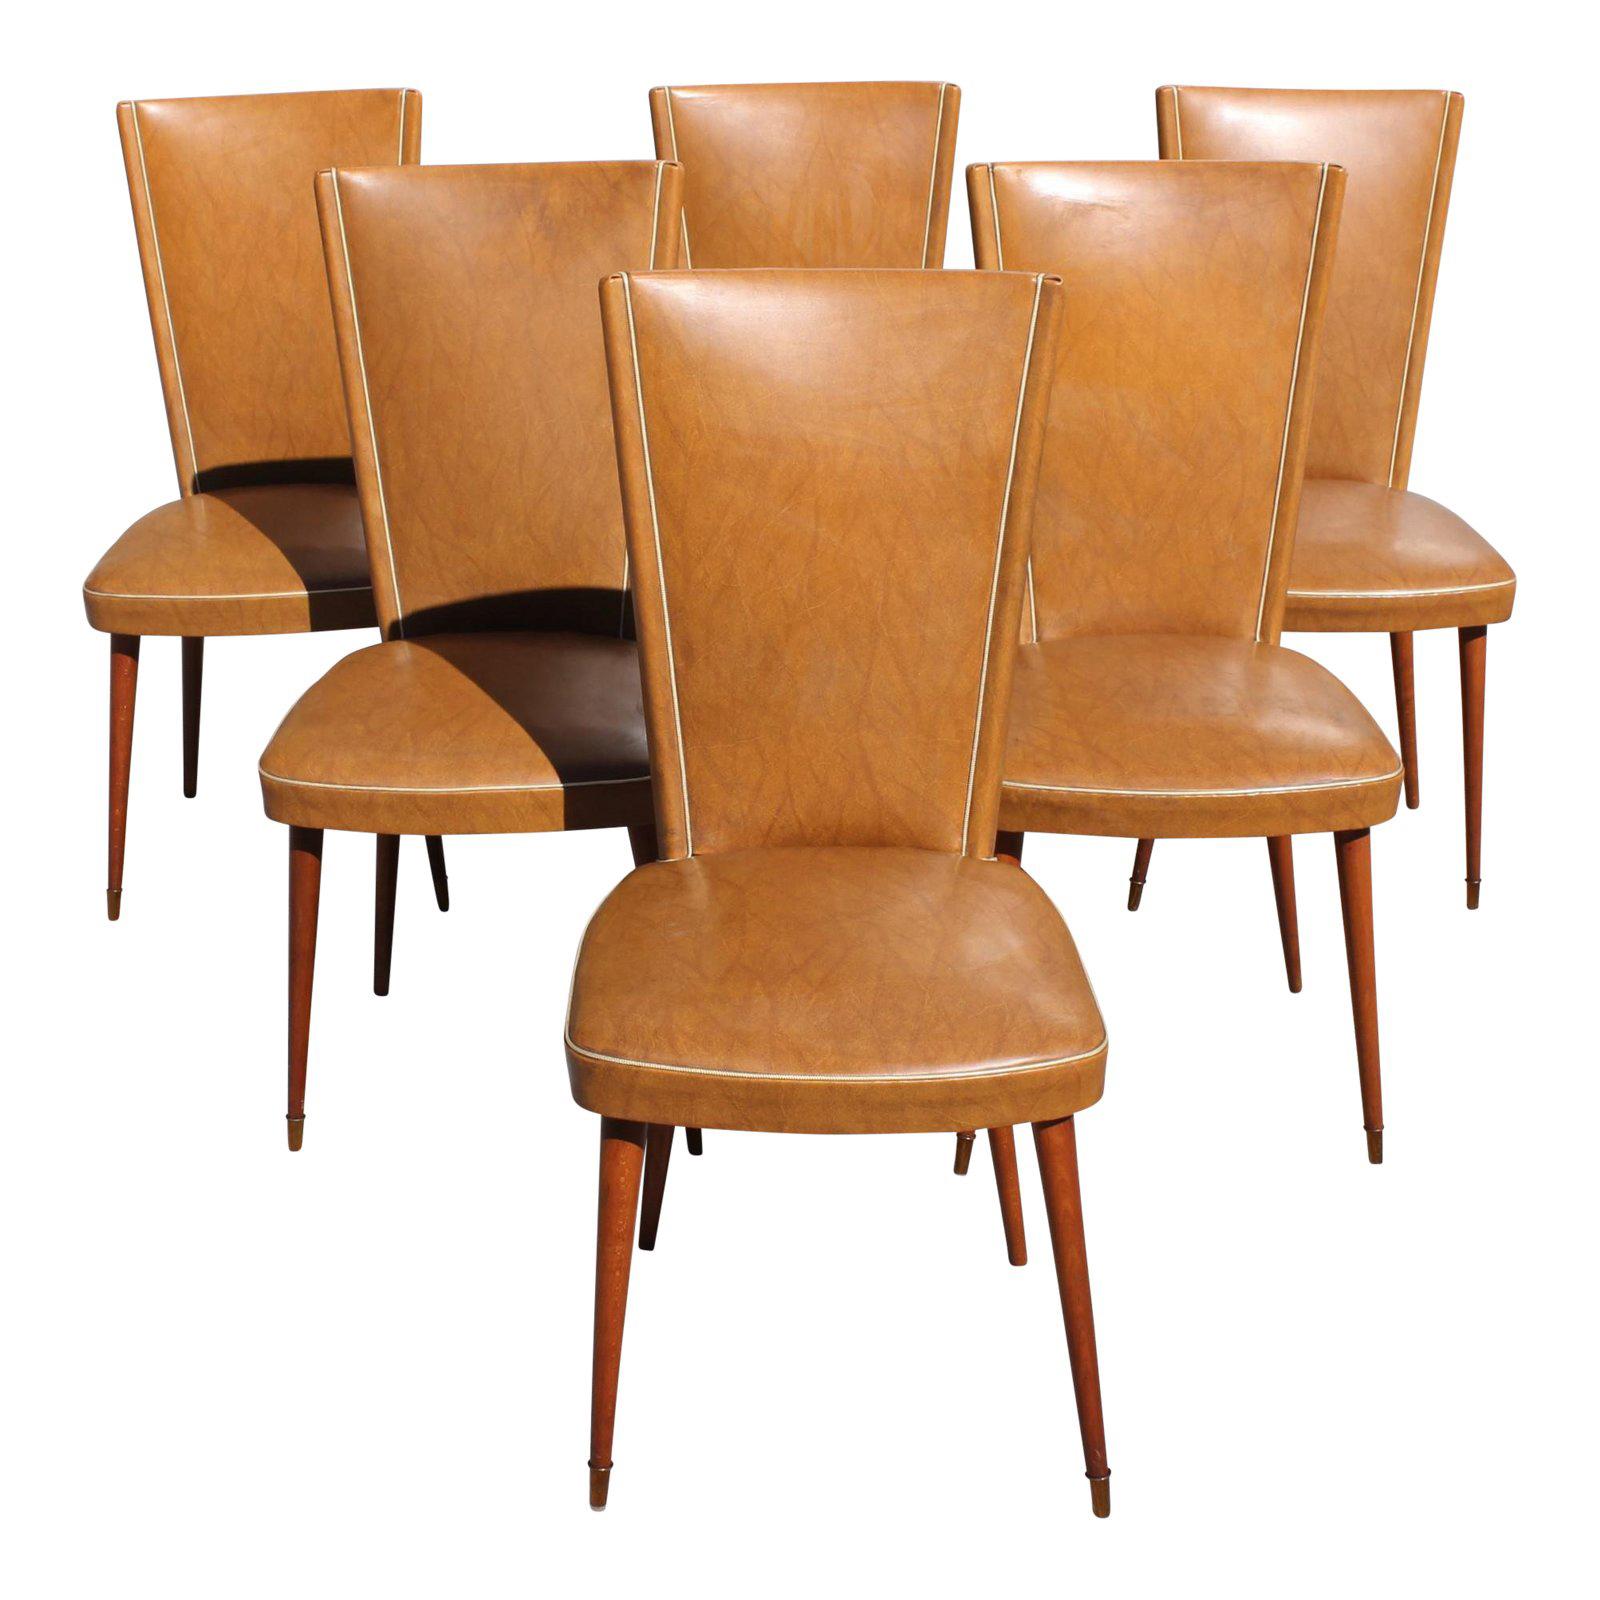 Set of 6 Mid-Century Modern Solid Mahogany Dining Chairs, 1960s